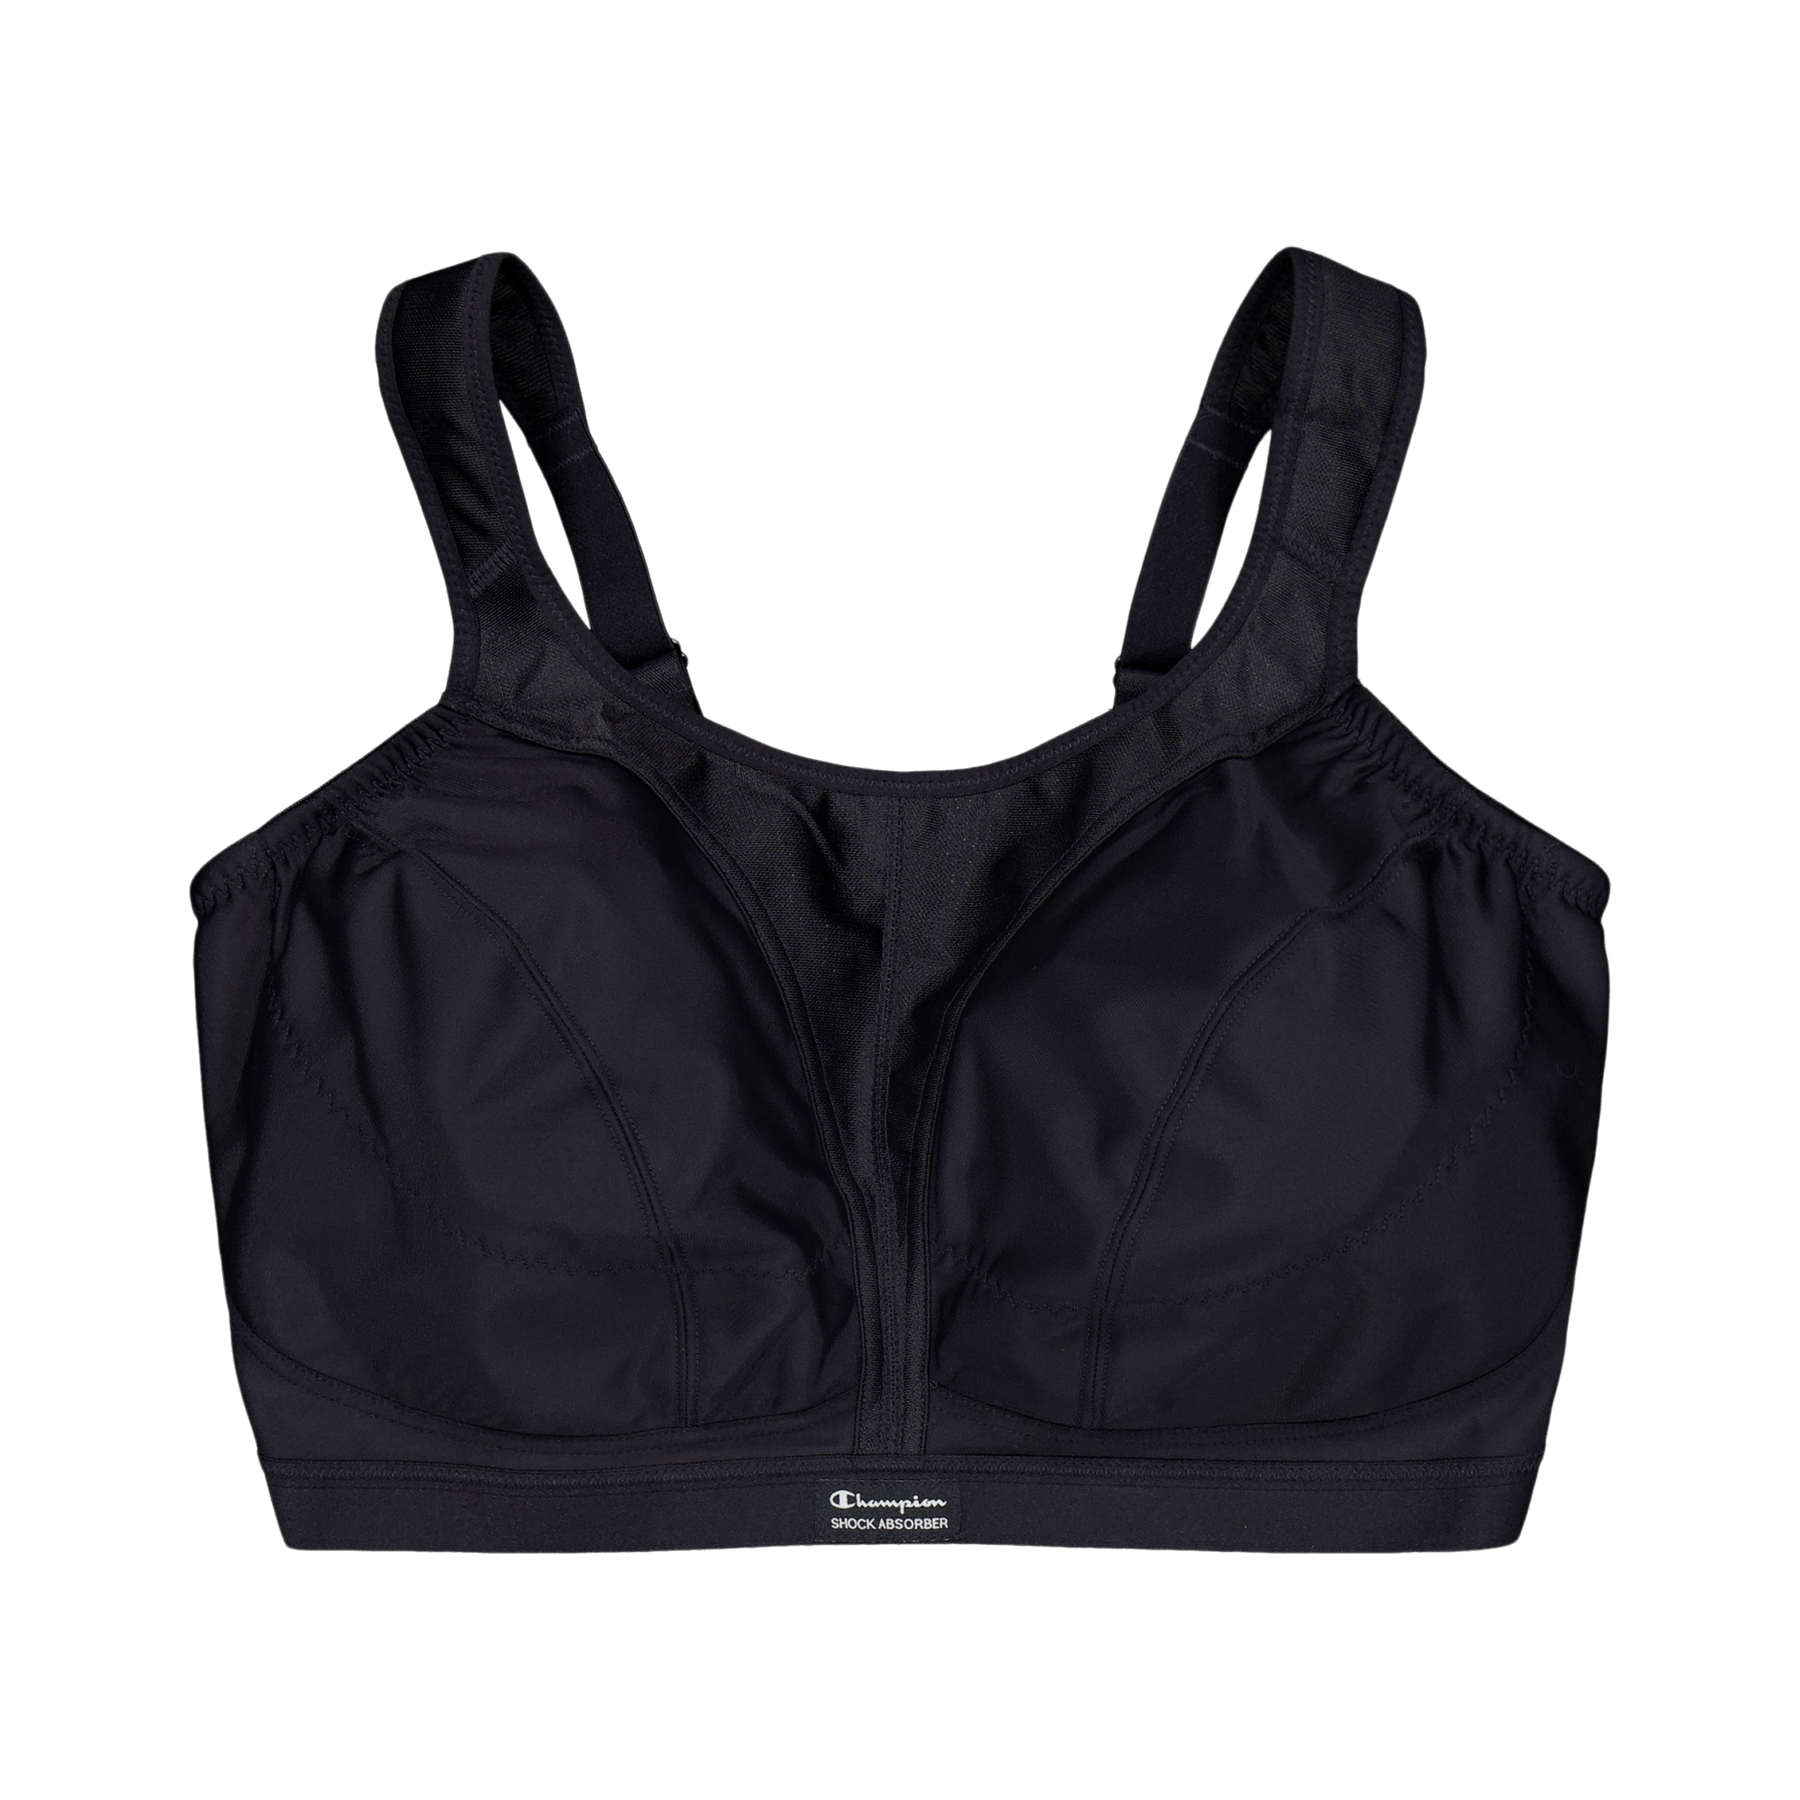 Shock Absorber Active classic support sports bra in black, £37.00